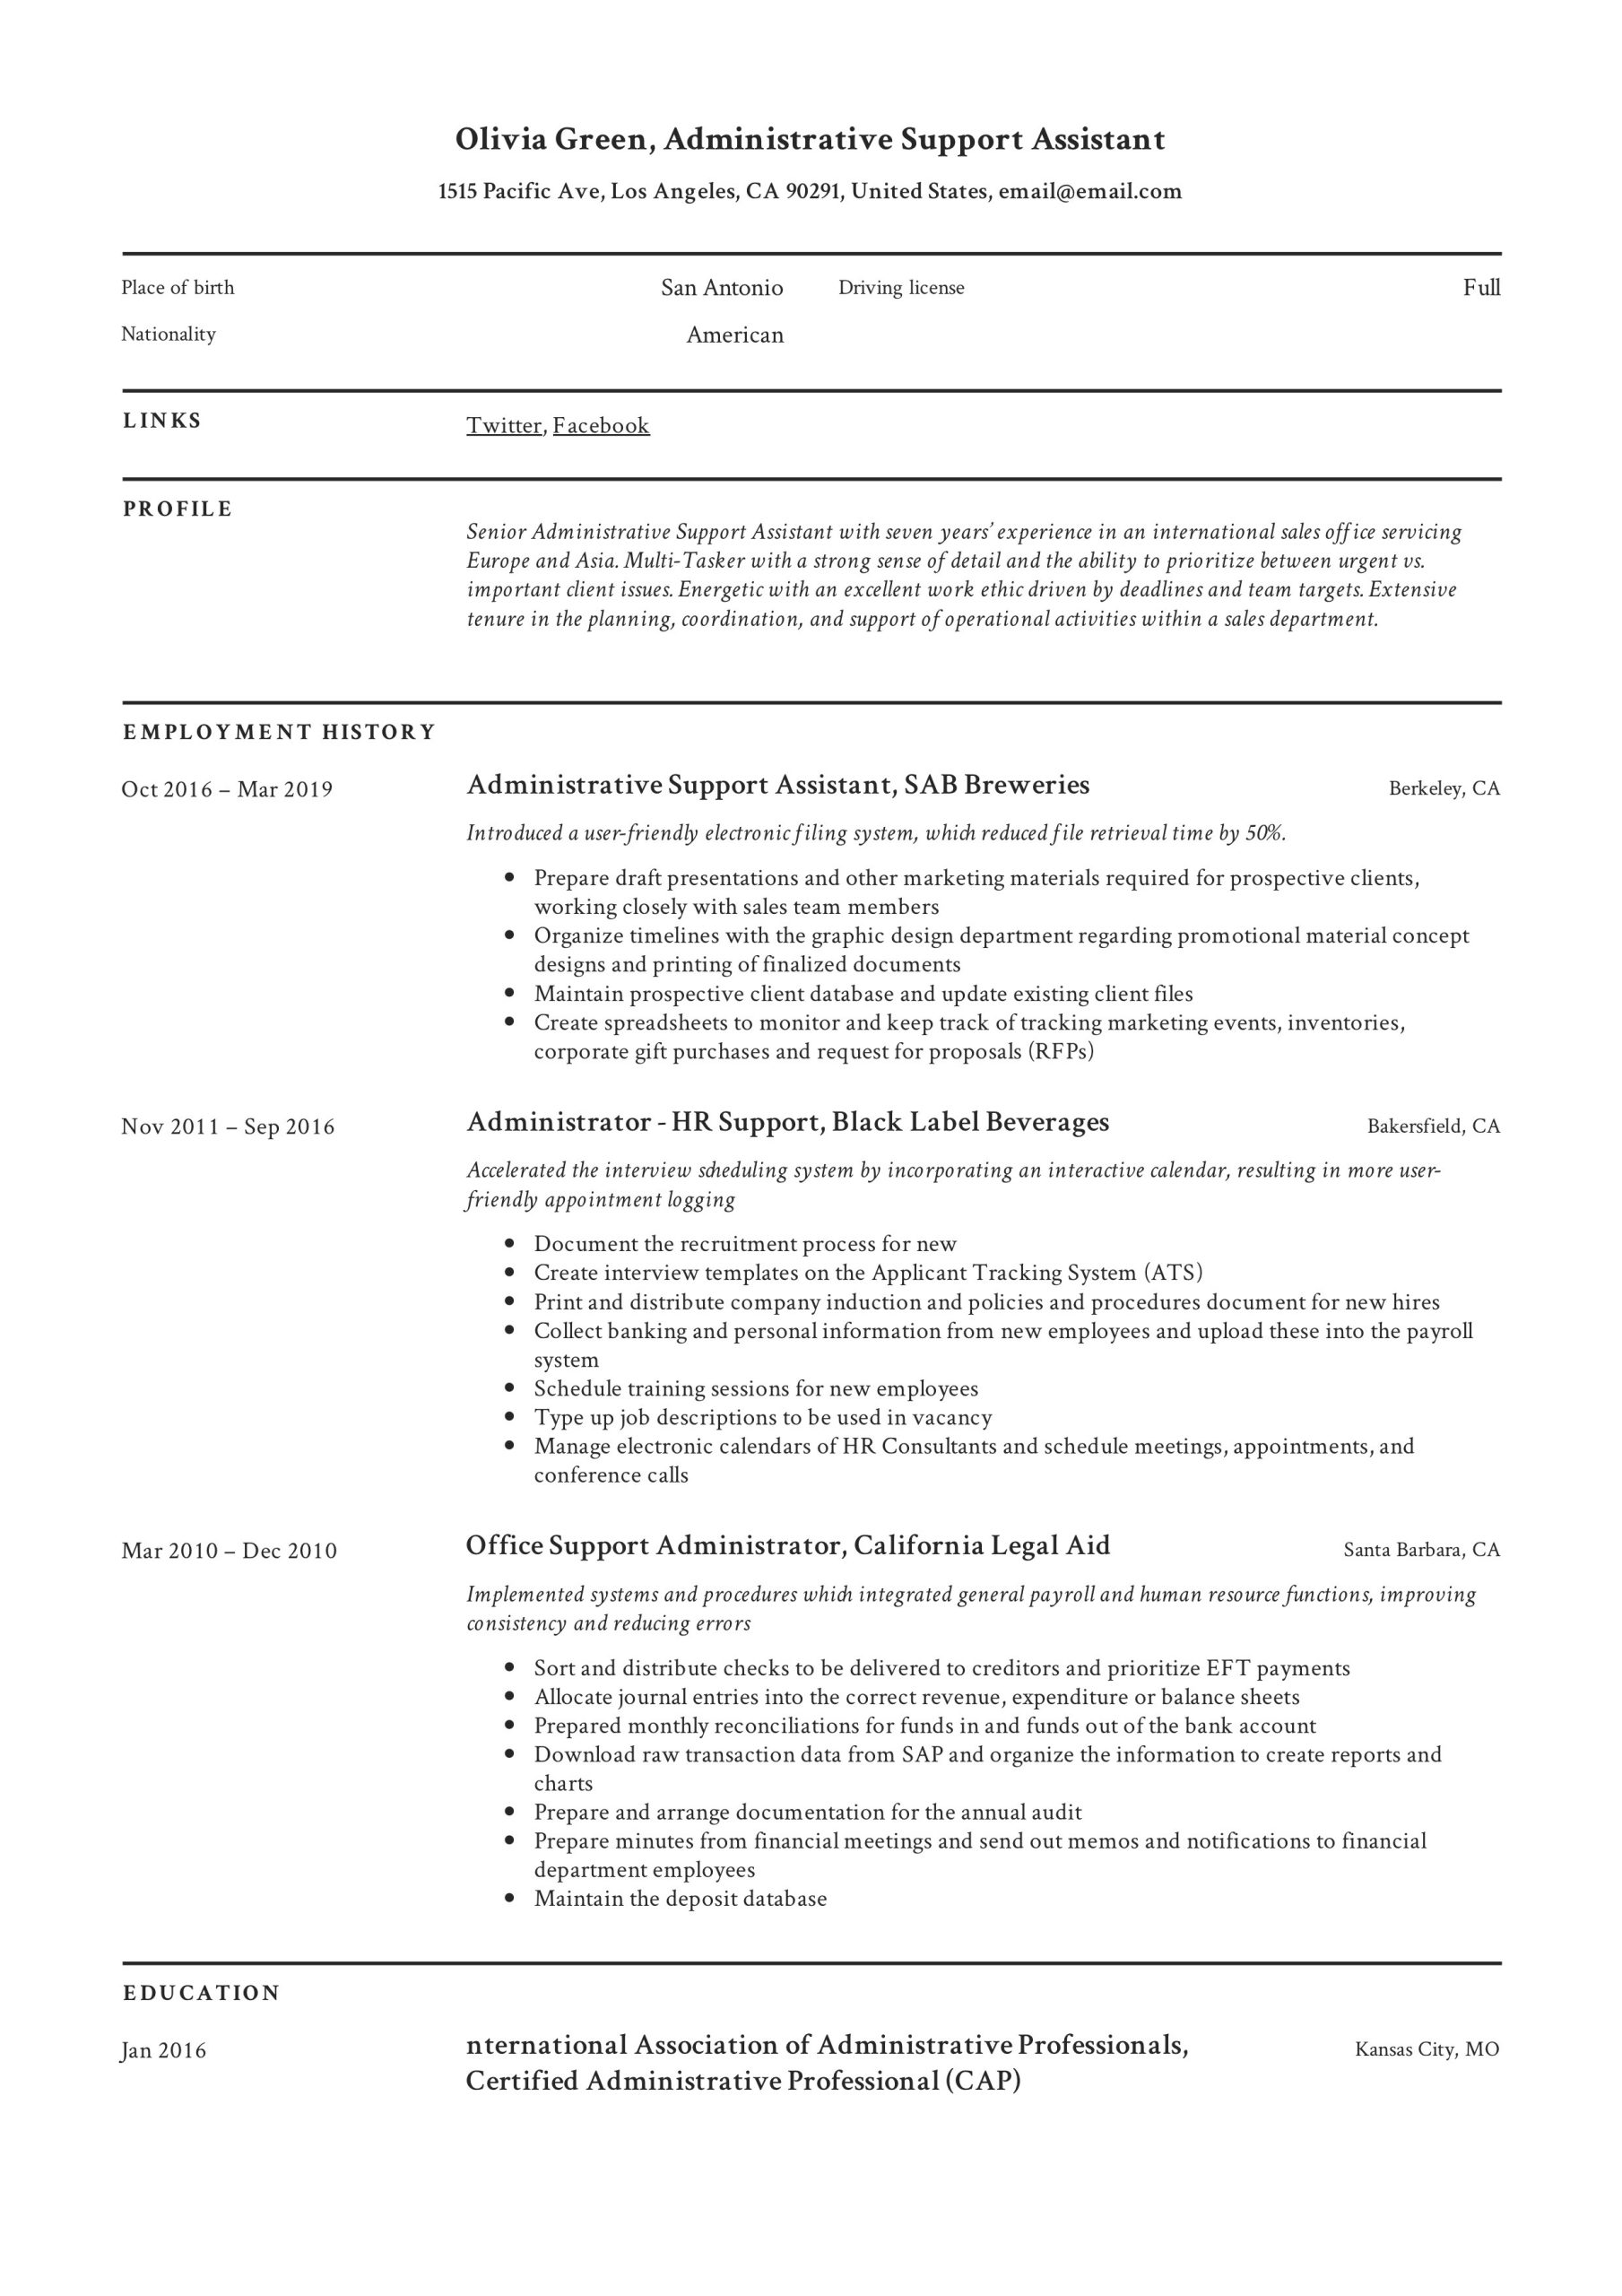 Sample Government Resume for Administrative Specialist Administrative Support assistant Resume   Guide 12 Pdf Resumes 2022